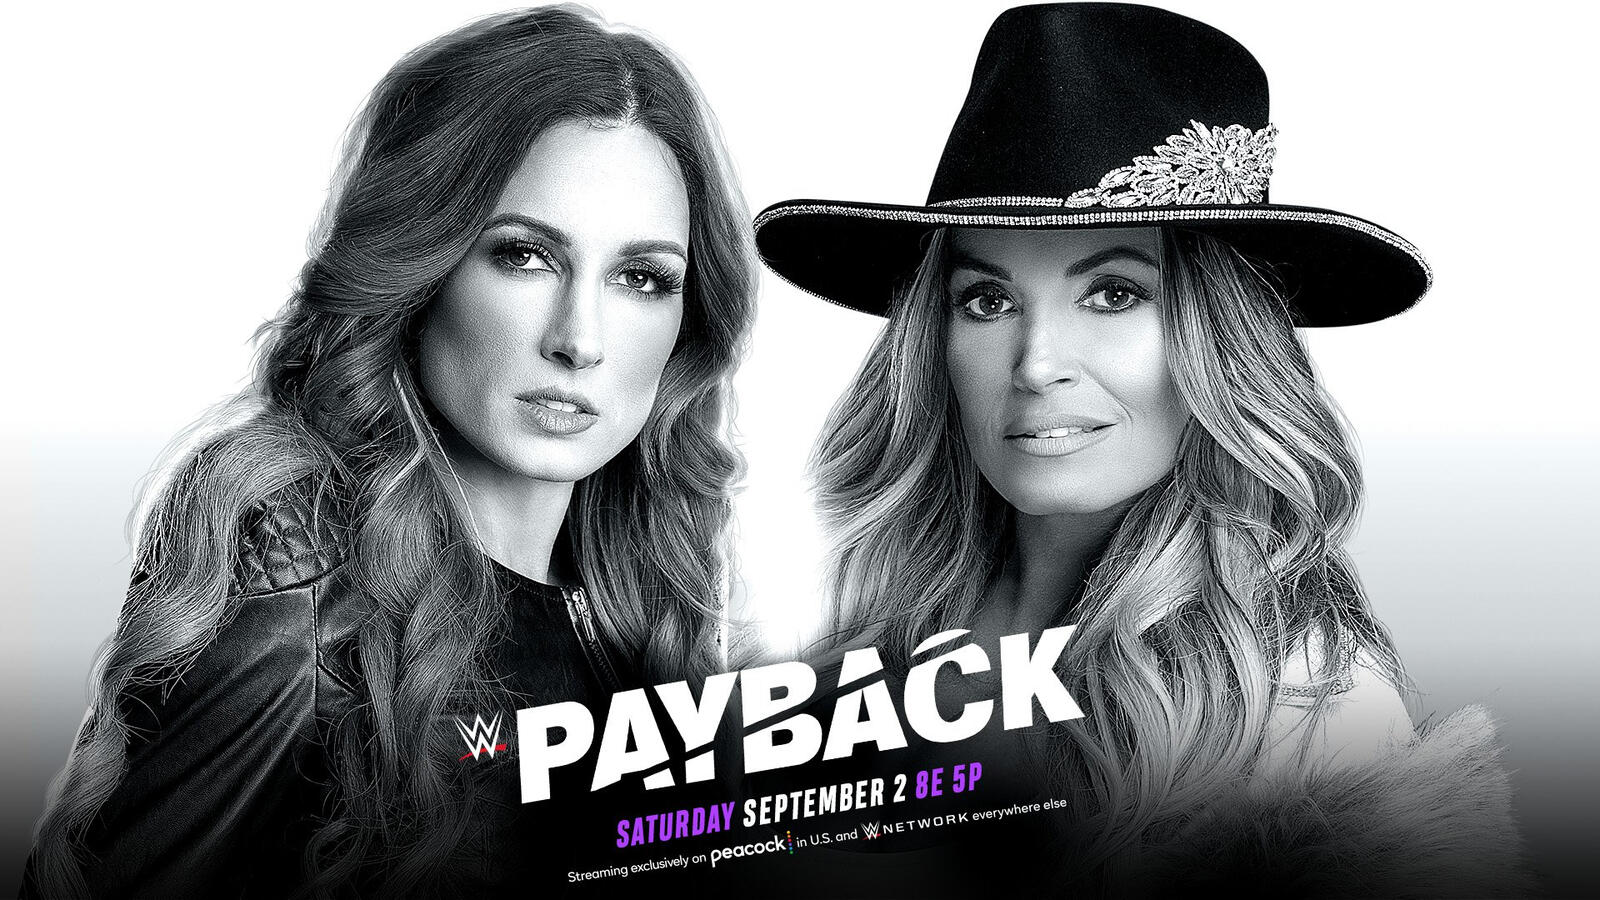 Trish Stratus - Becky Lynch Steel Cage Match Confirmed For WWE Payback